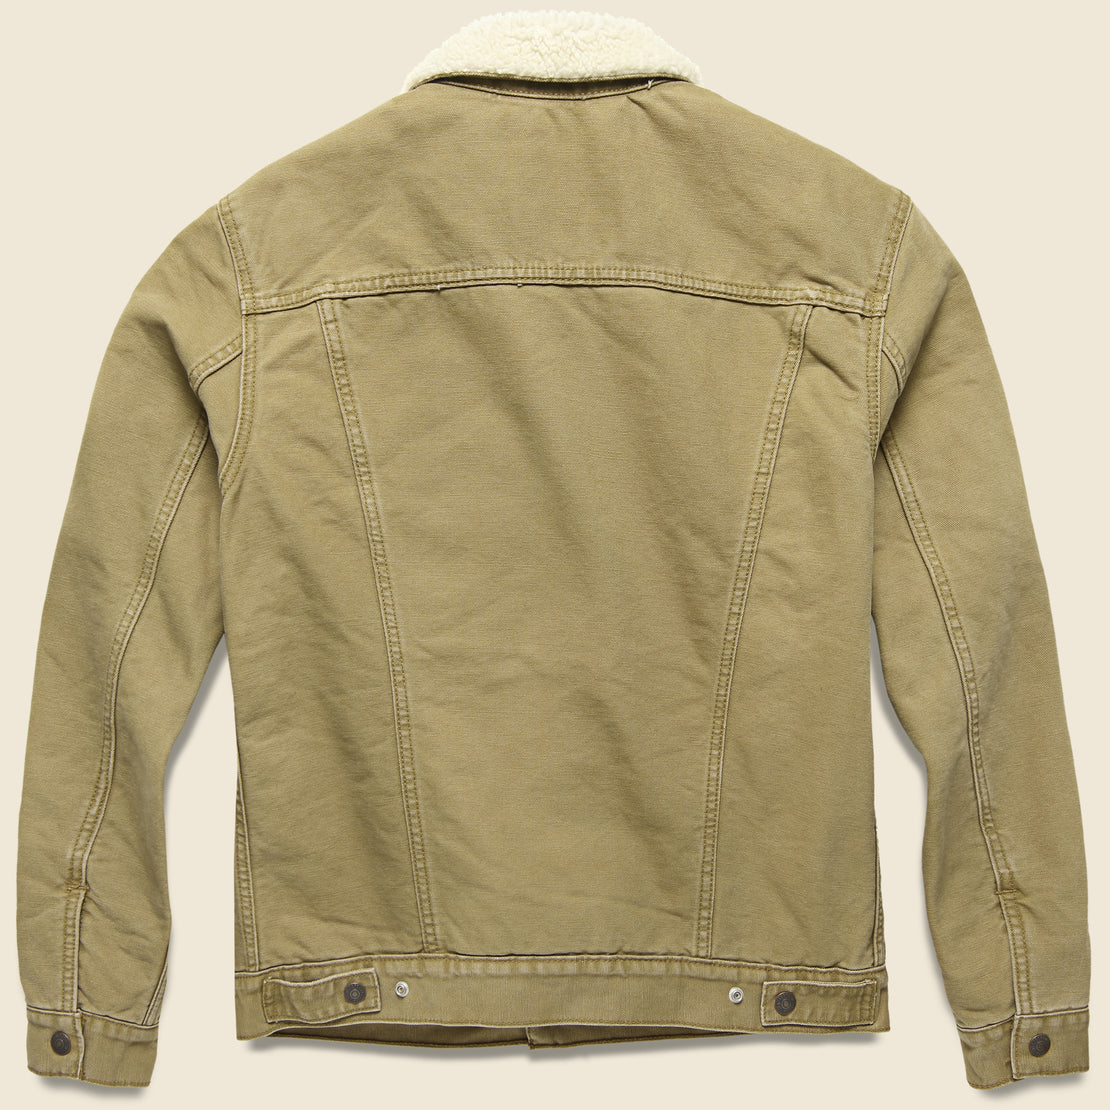 Type III Sherpa Trucker Jacket - Washed Cougar Canvas - Levis Premium - STAG Provisions - Outerwear - Coat / Jacket